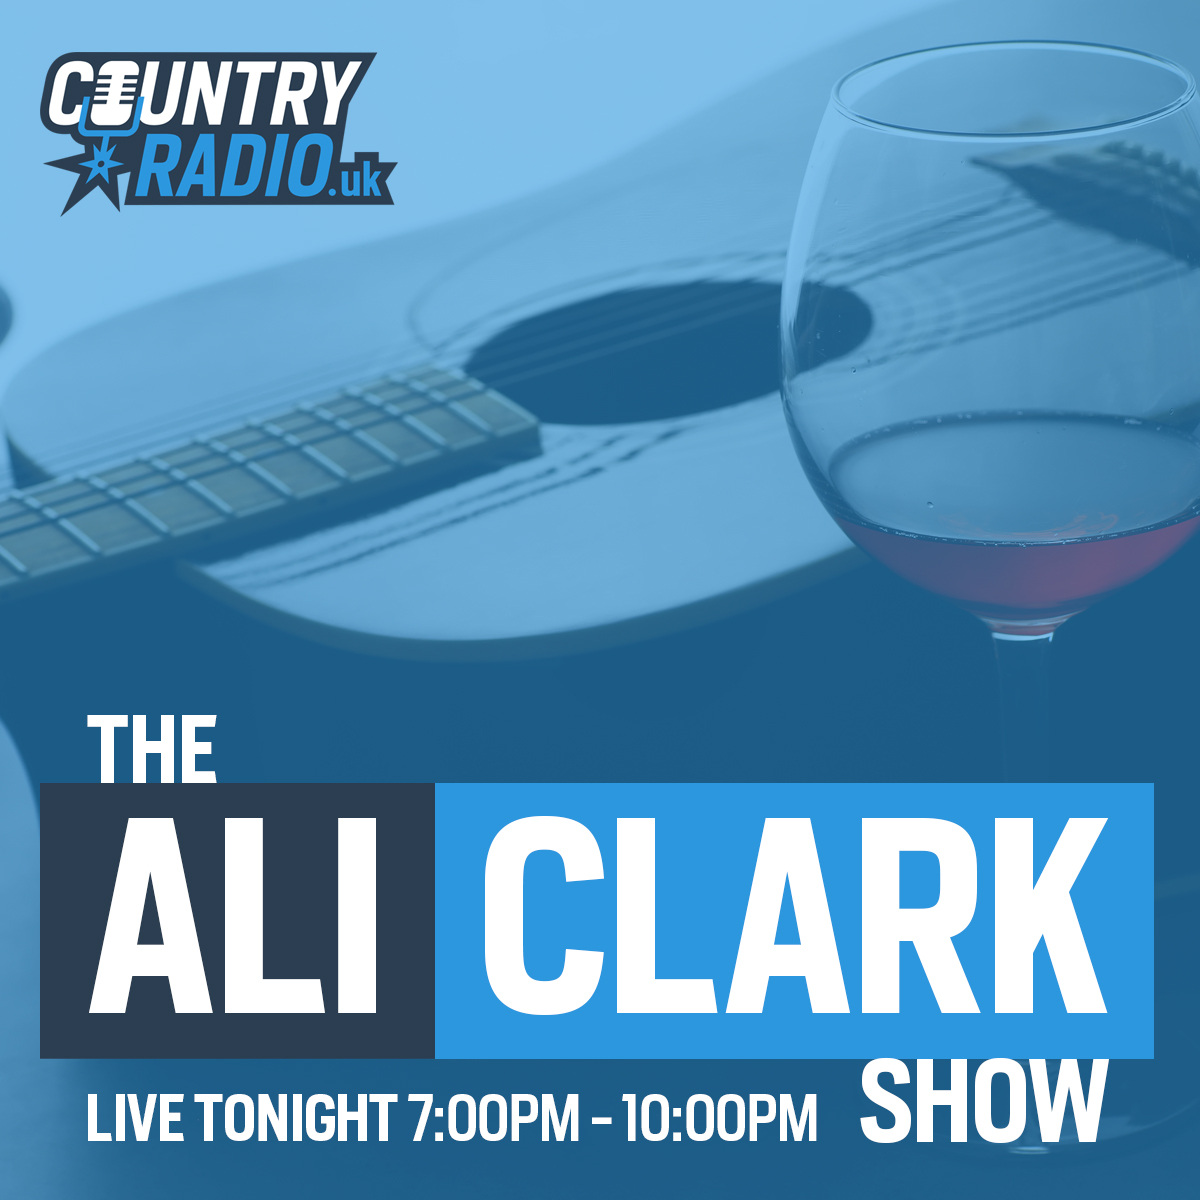 NEXT: THE ALI CLARK SHOW 7:00pm - 10:00pm LIVE on CountryRadio.uk It's time for this week's get together with Ali, top up your wine and enjoy plenty of chat and great country music. CountryRadio.uk | TuneIn | 'Alexa, enable Country Radio' | Mixcloud Live